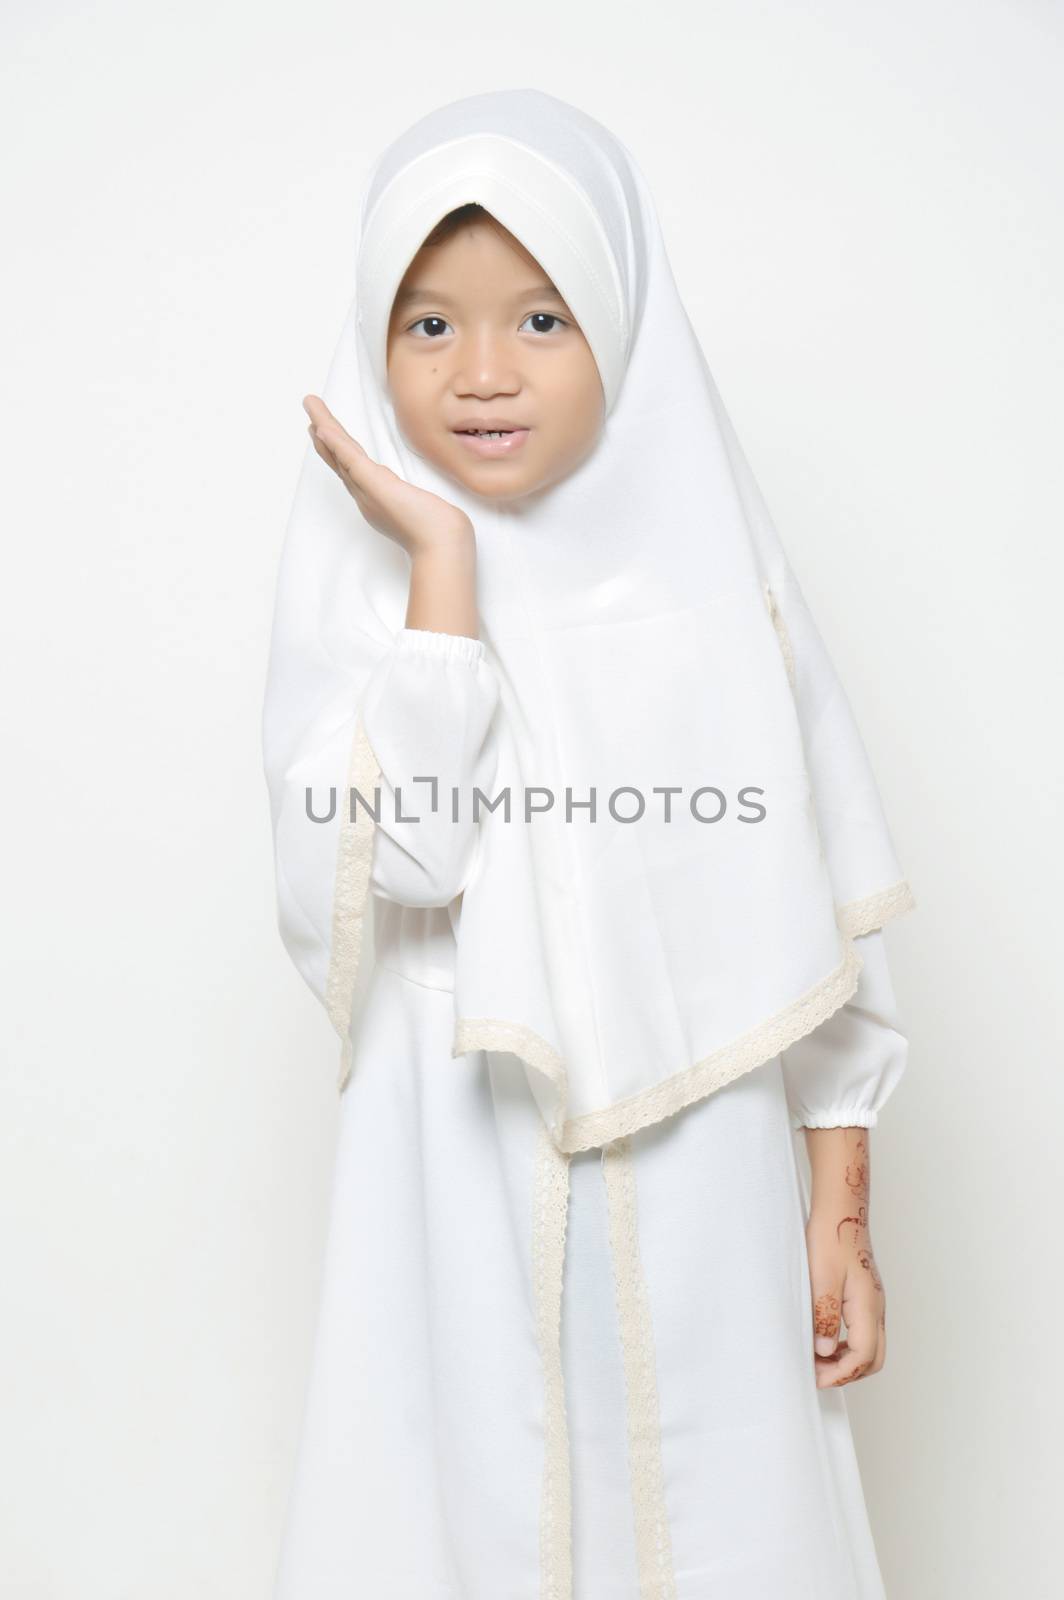 Moslem Asian little girl dressed with hijab in white